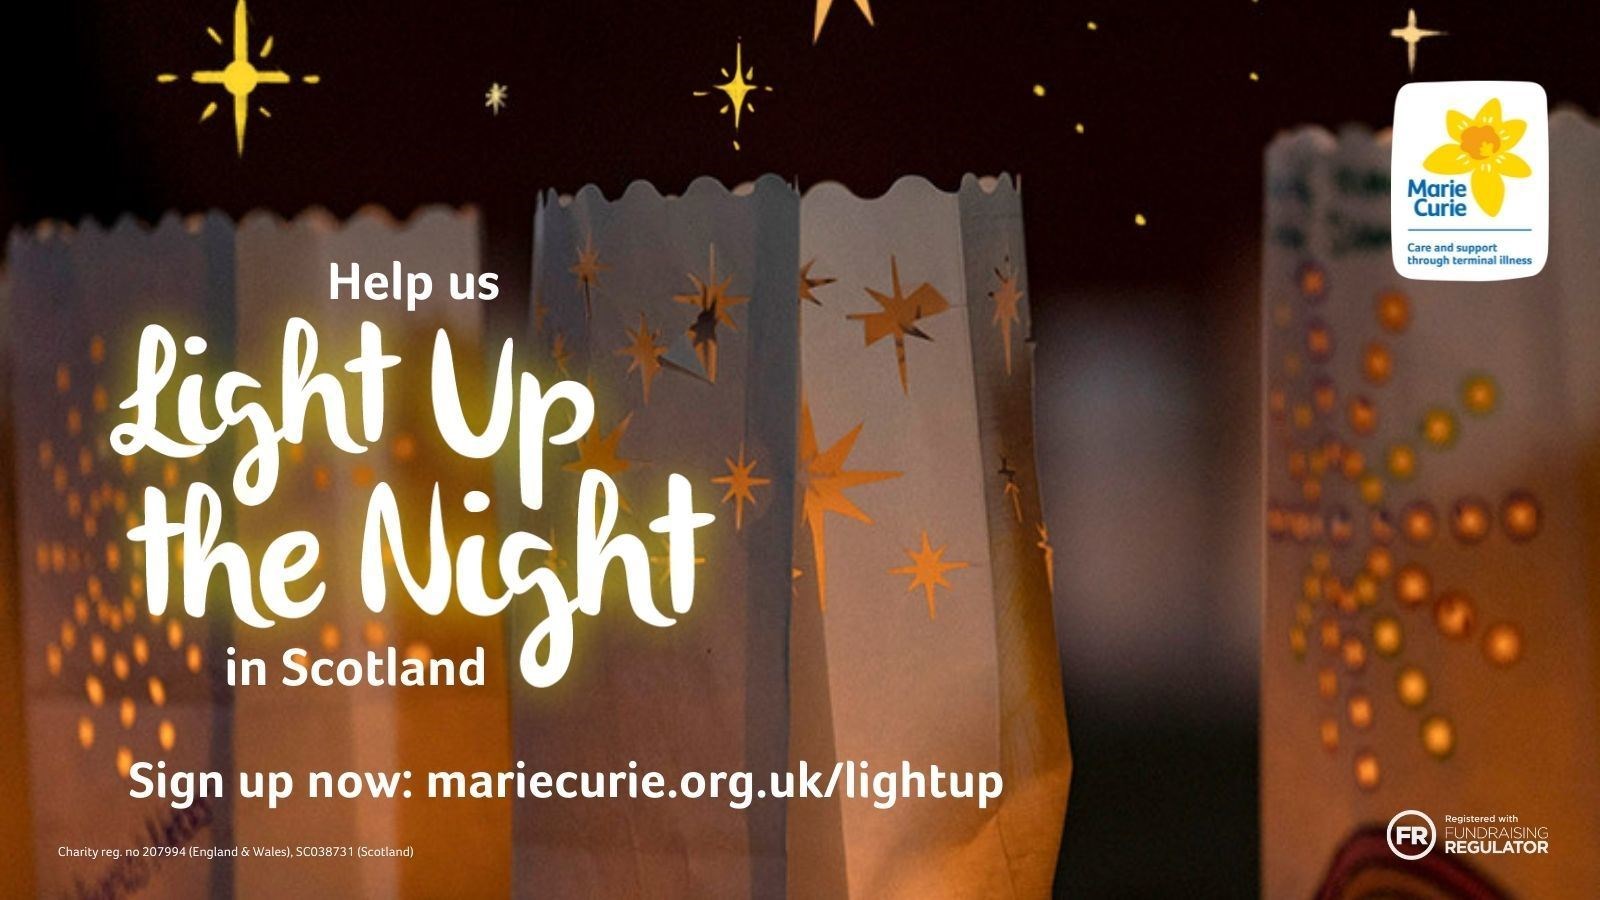 Marie Curie have launched their festive fund-raiser Light Up the Night.